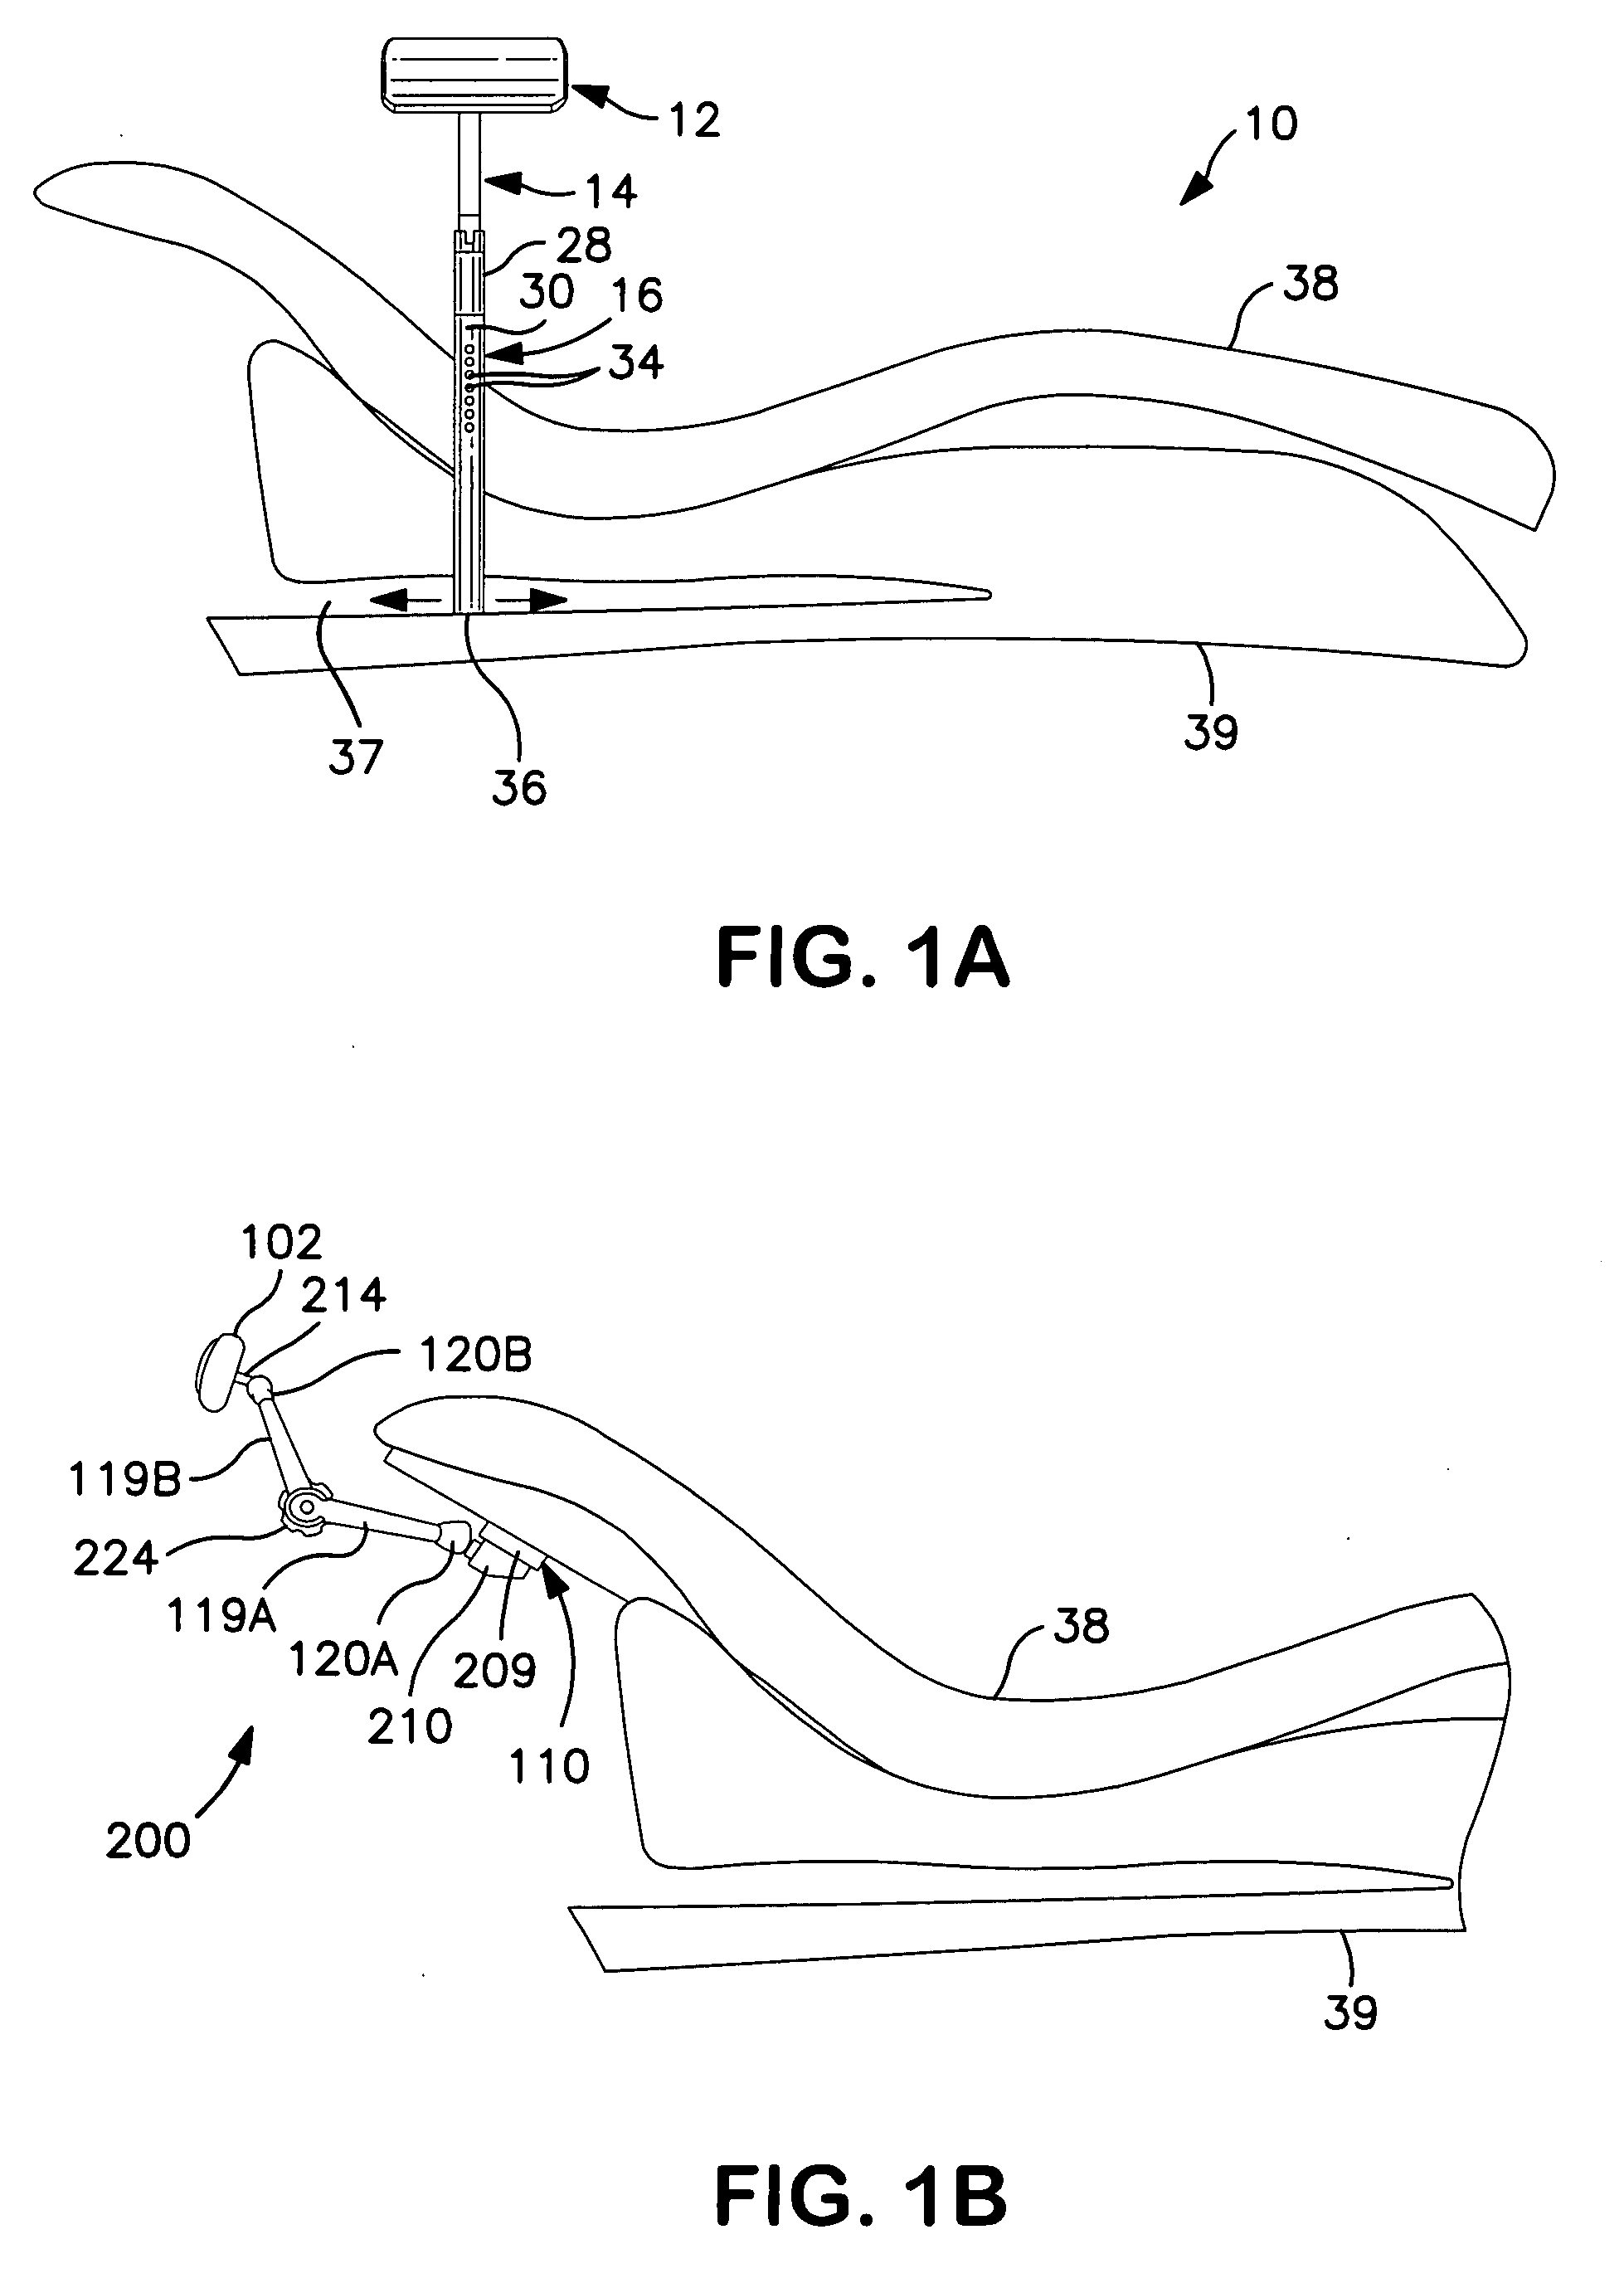 Anterior support device